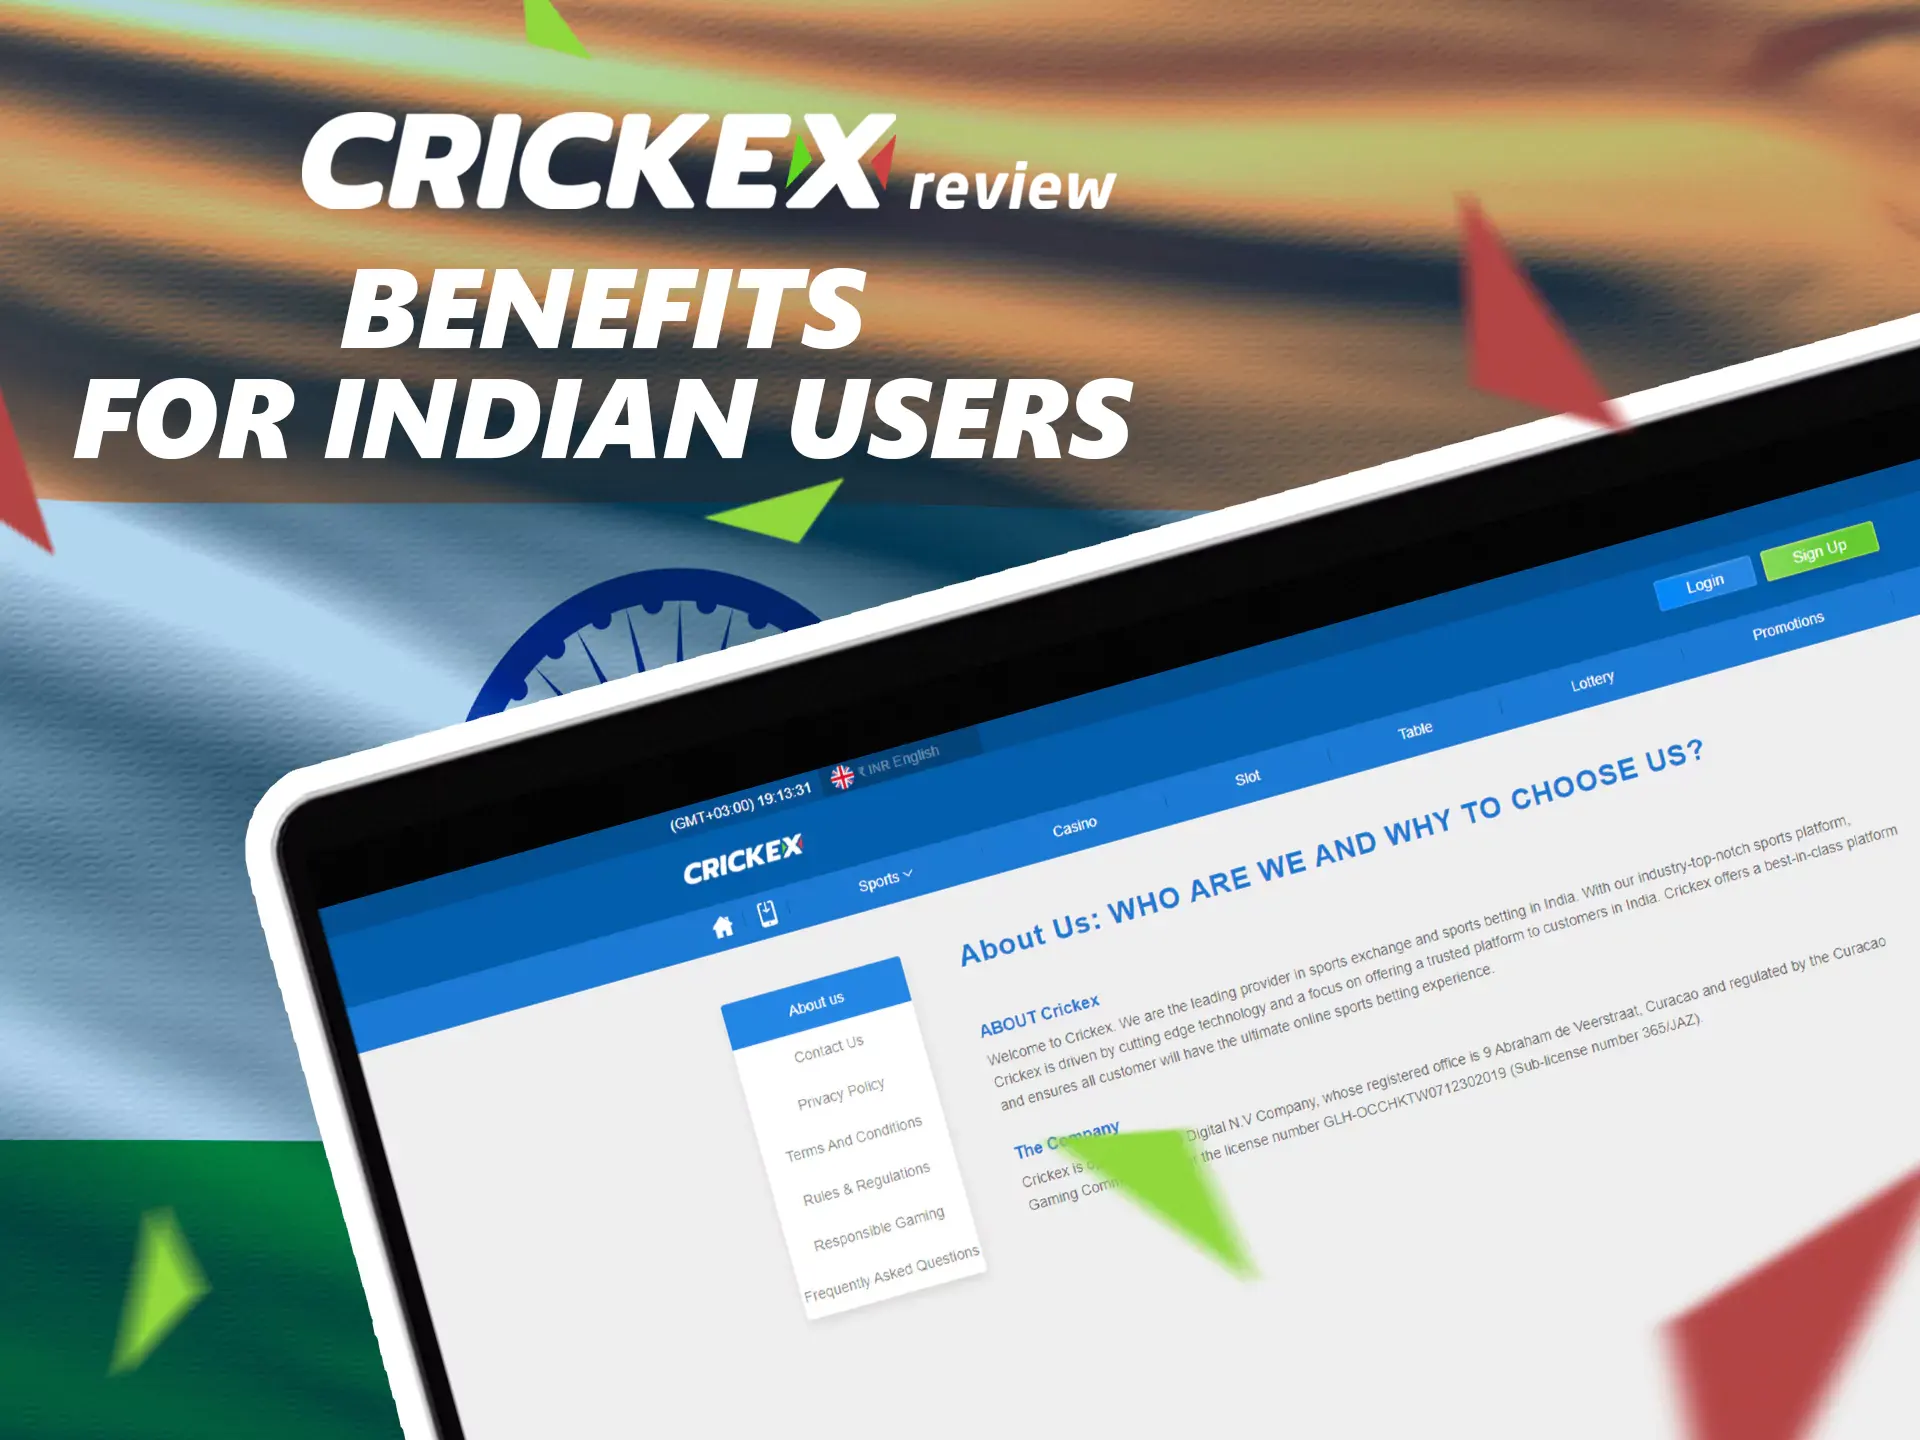 Crickex is great for online sports betting in India.